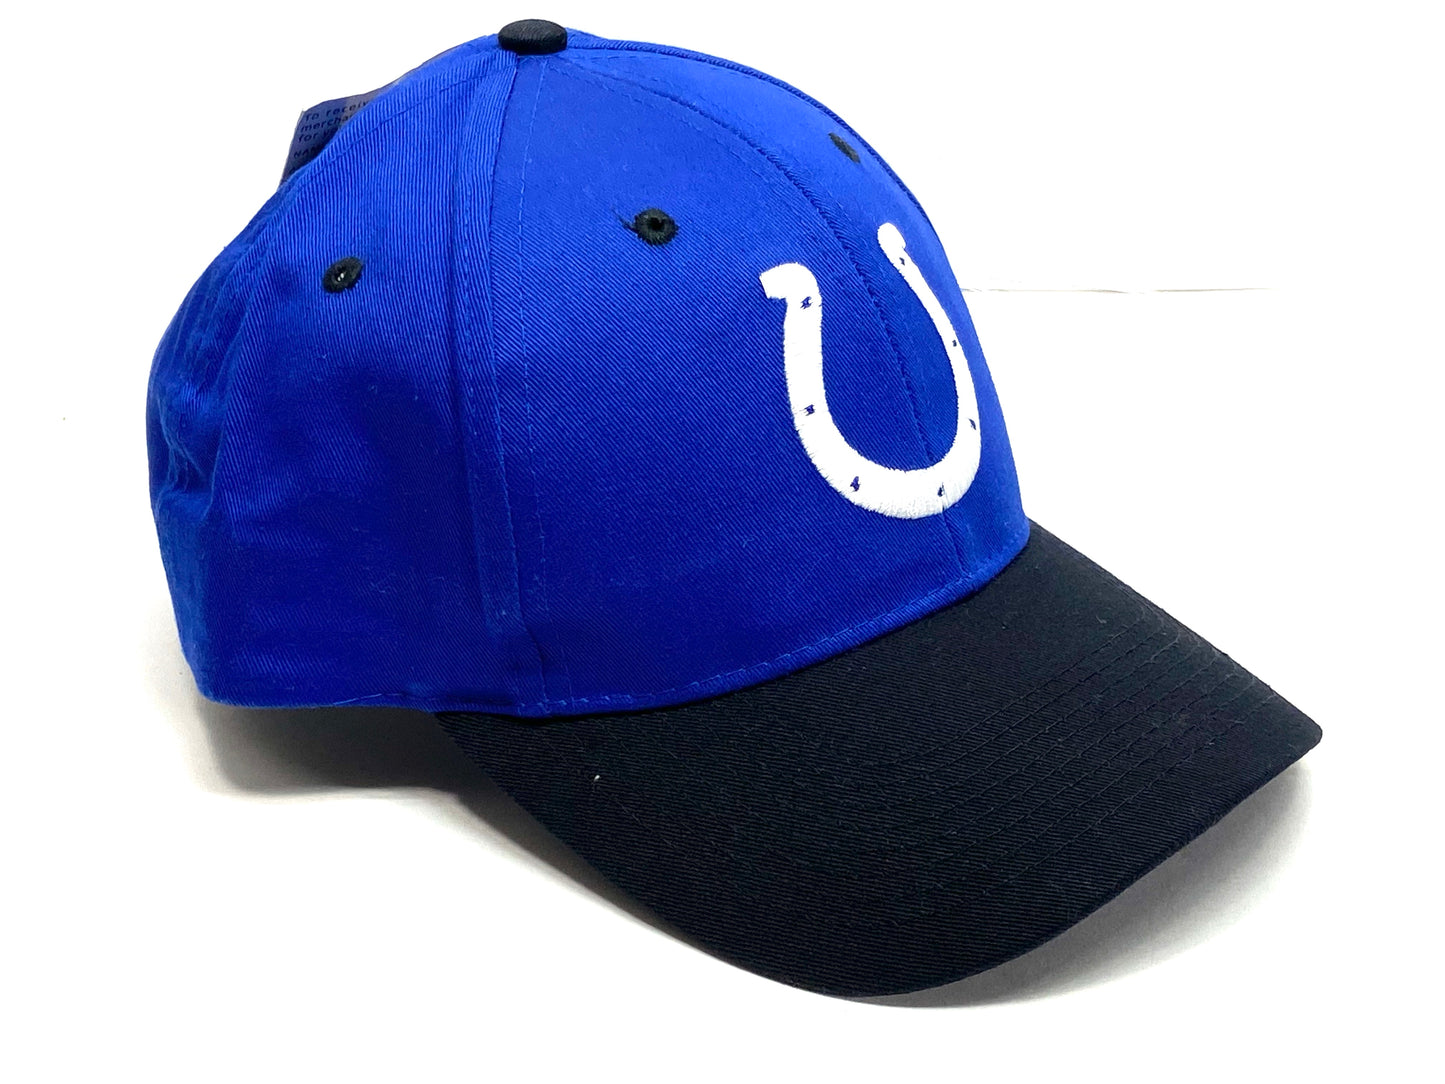 Indianapolis Colts Vintage NFL Blue NOS Replica Cap by Drew Pearson Marketing